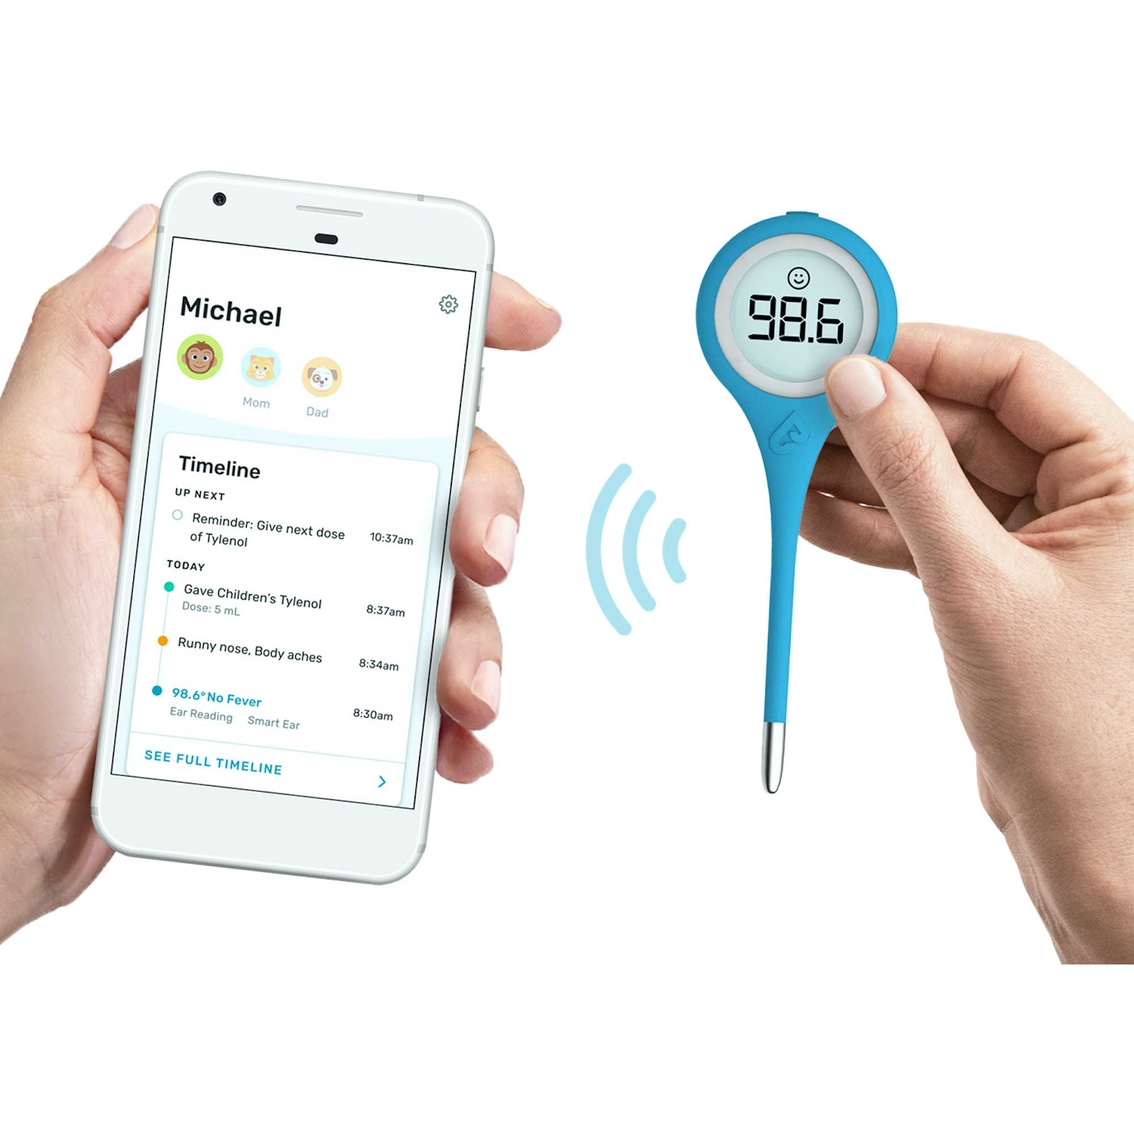 Kinsa QuickCare Smart Digital Thermometer with Smartphone App and Health Guidance - Image 5 of 6